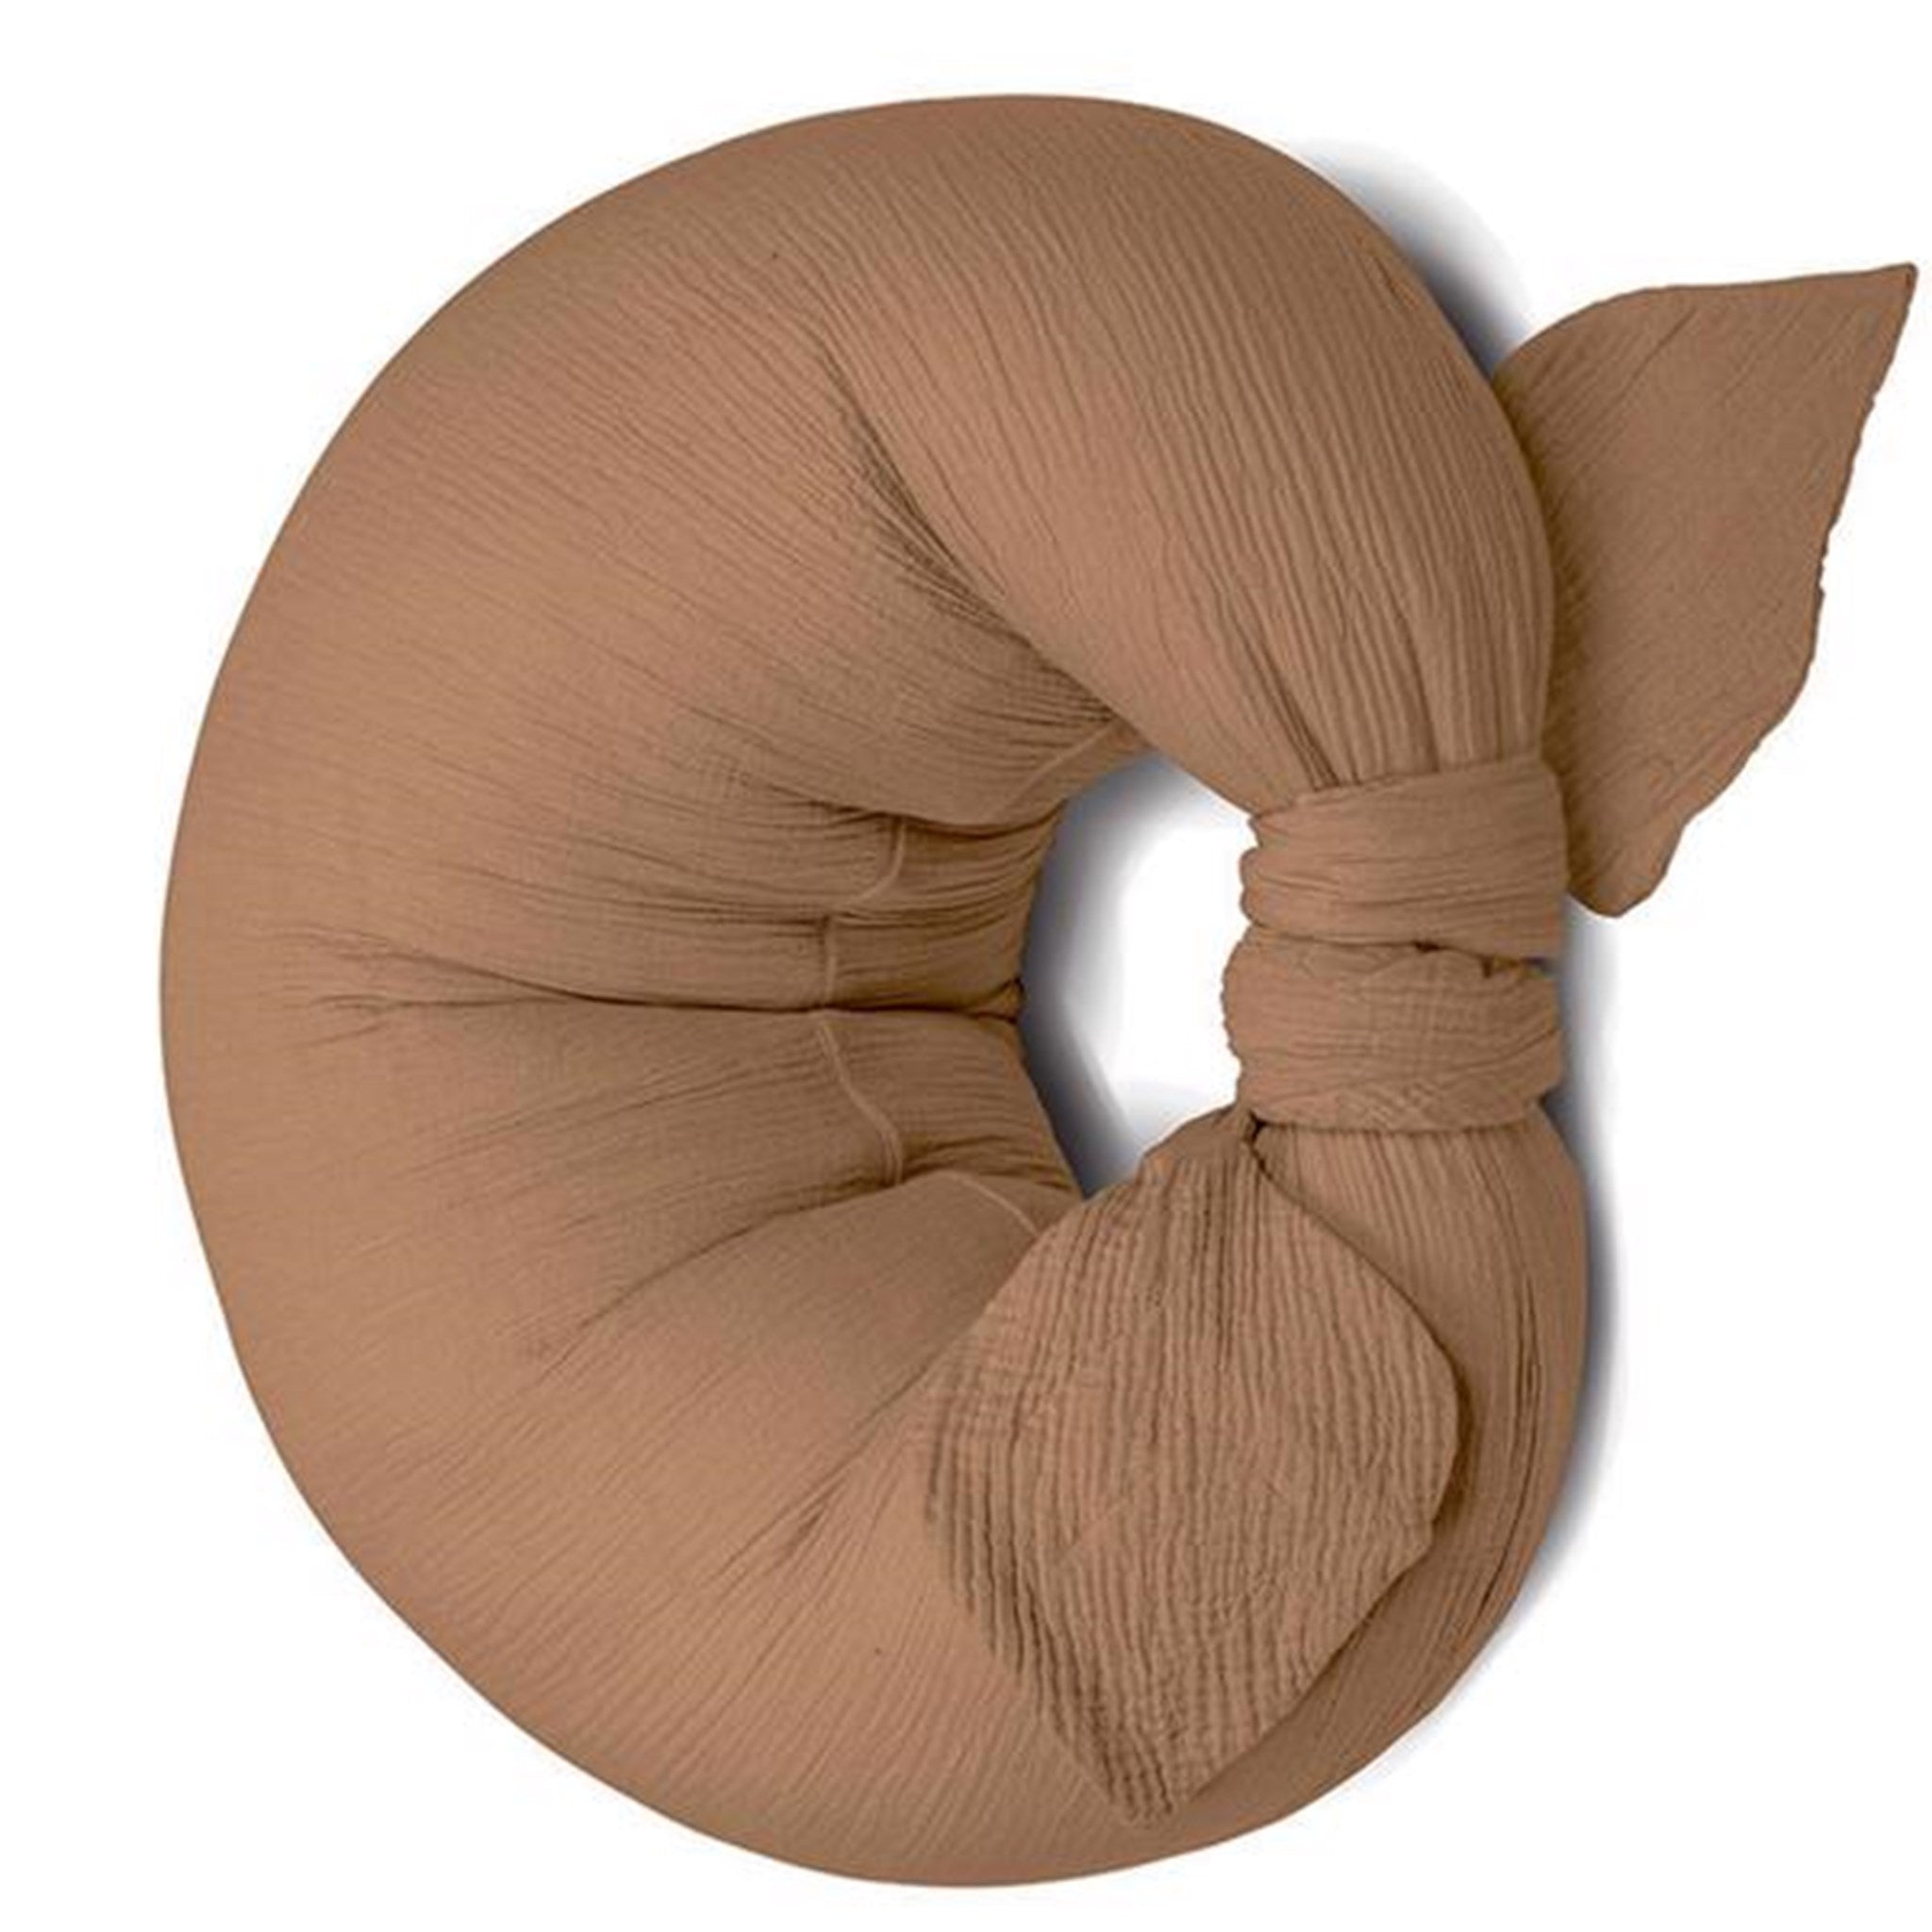 That's Mine Nursing Pillow Cover Brown 2